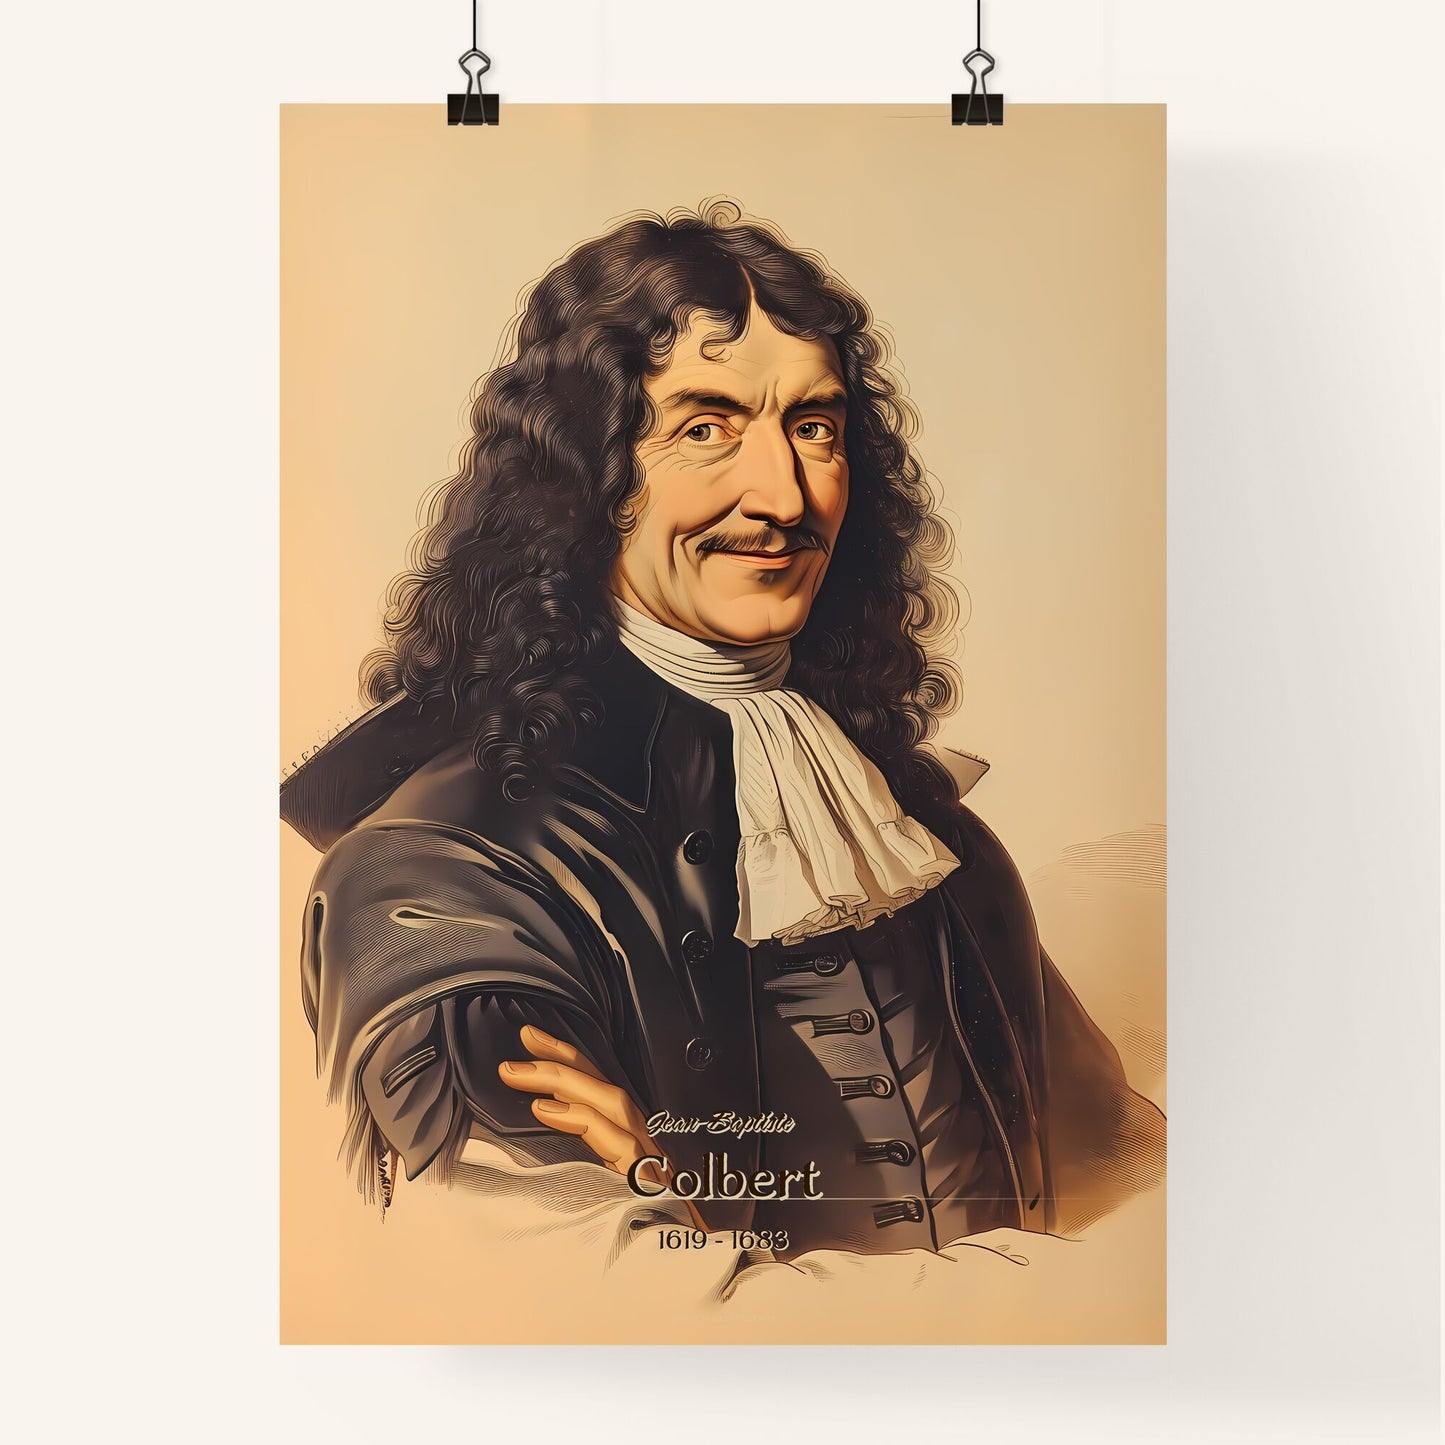 Jean-Baptiste, Colbert, 1619 - 1683, A Poster of a man with long curly hair wearing a black coat Default Title